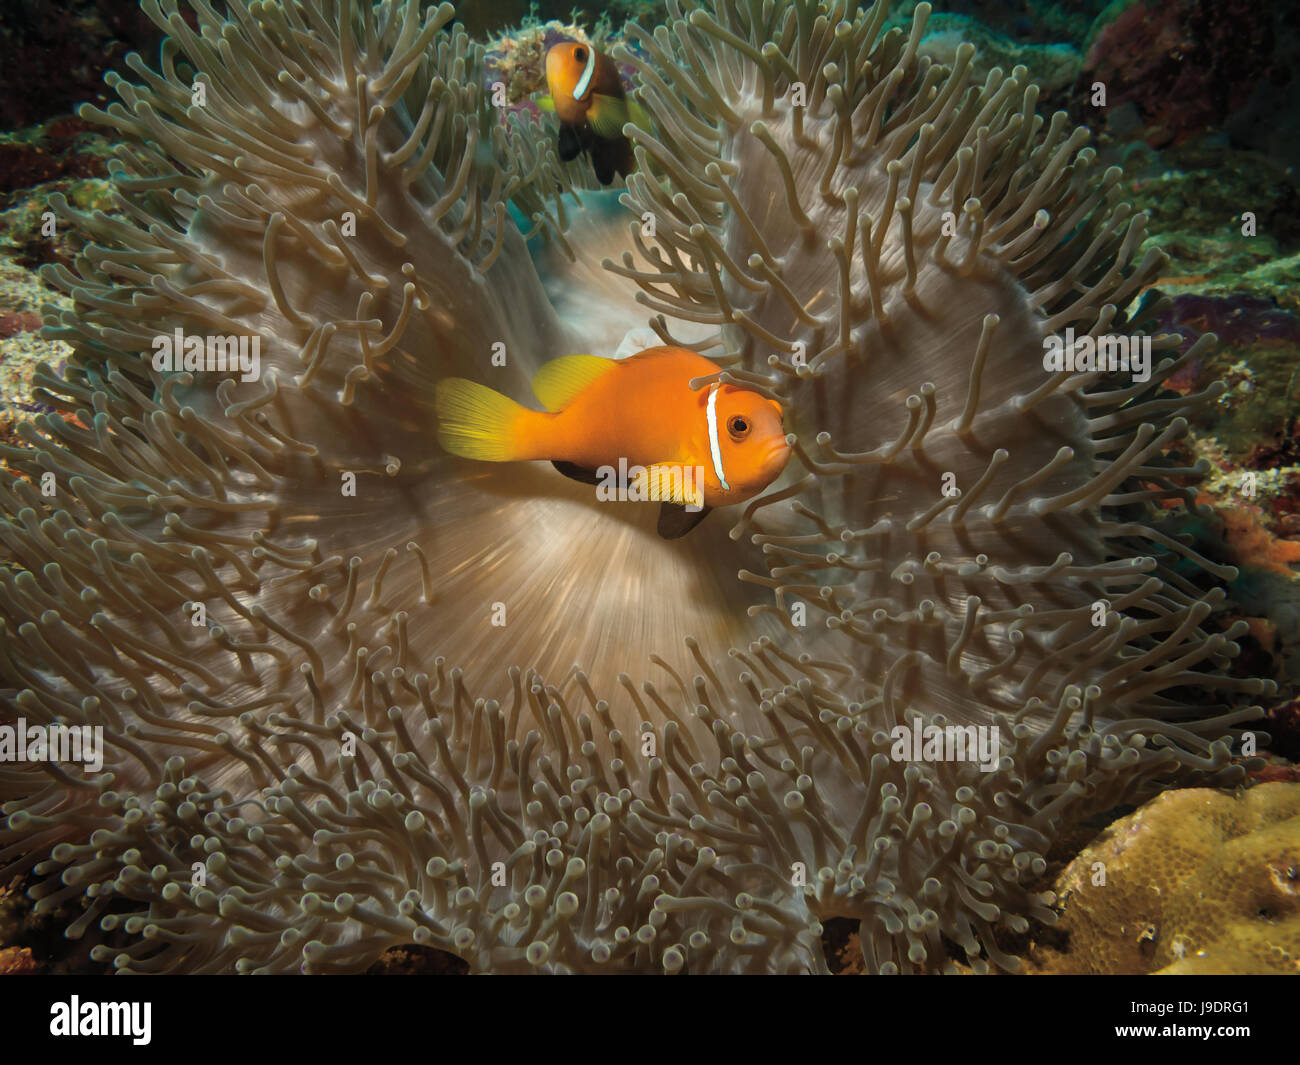 Black footed Clownfish, Amphiprion nigripes, sheltering in Anemone on coral reef in Bathala, Maldives Stock Photo